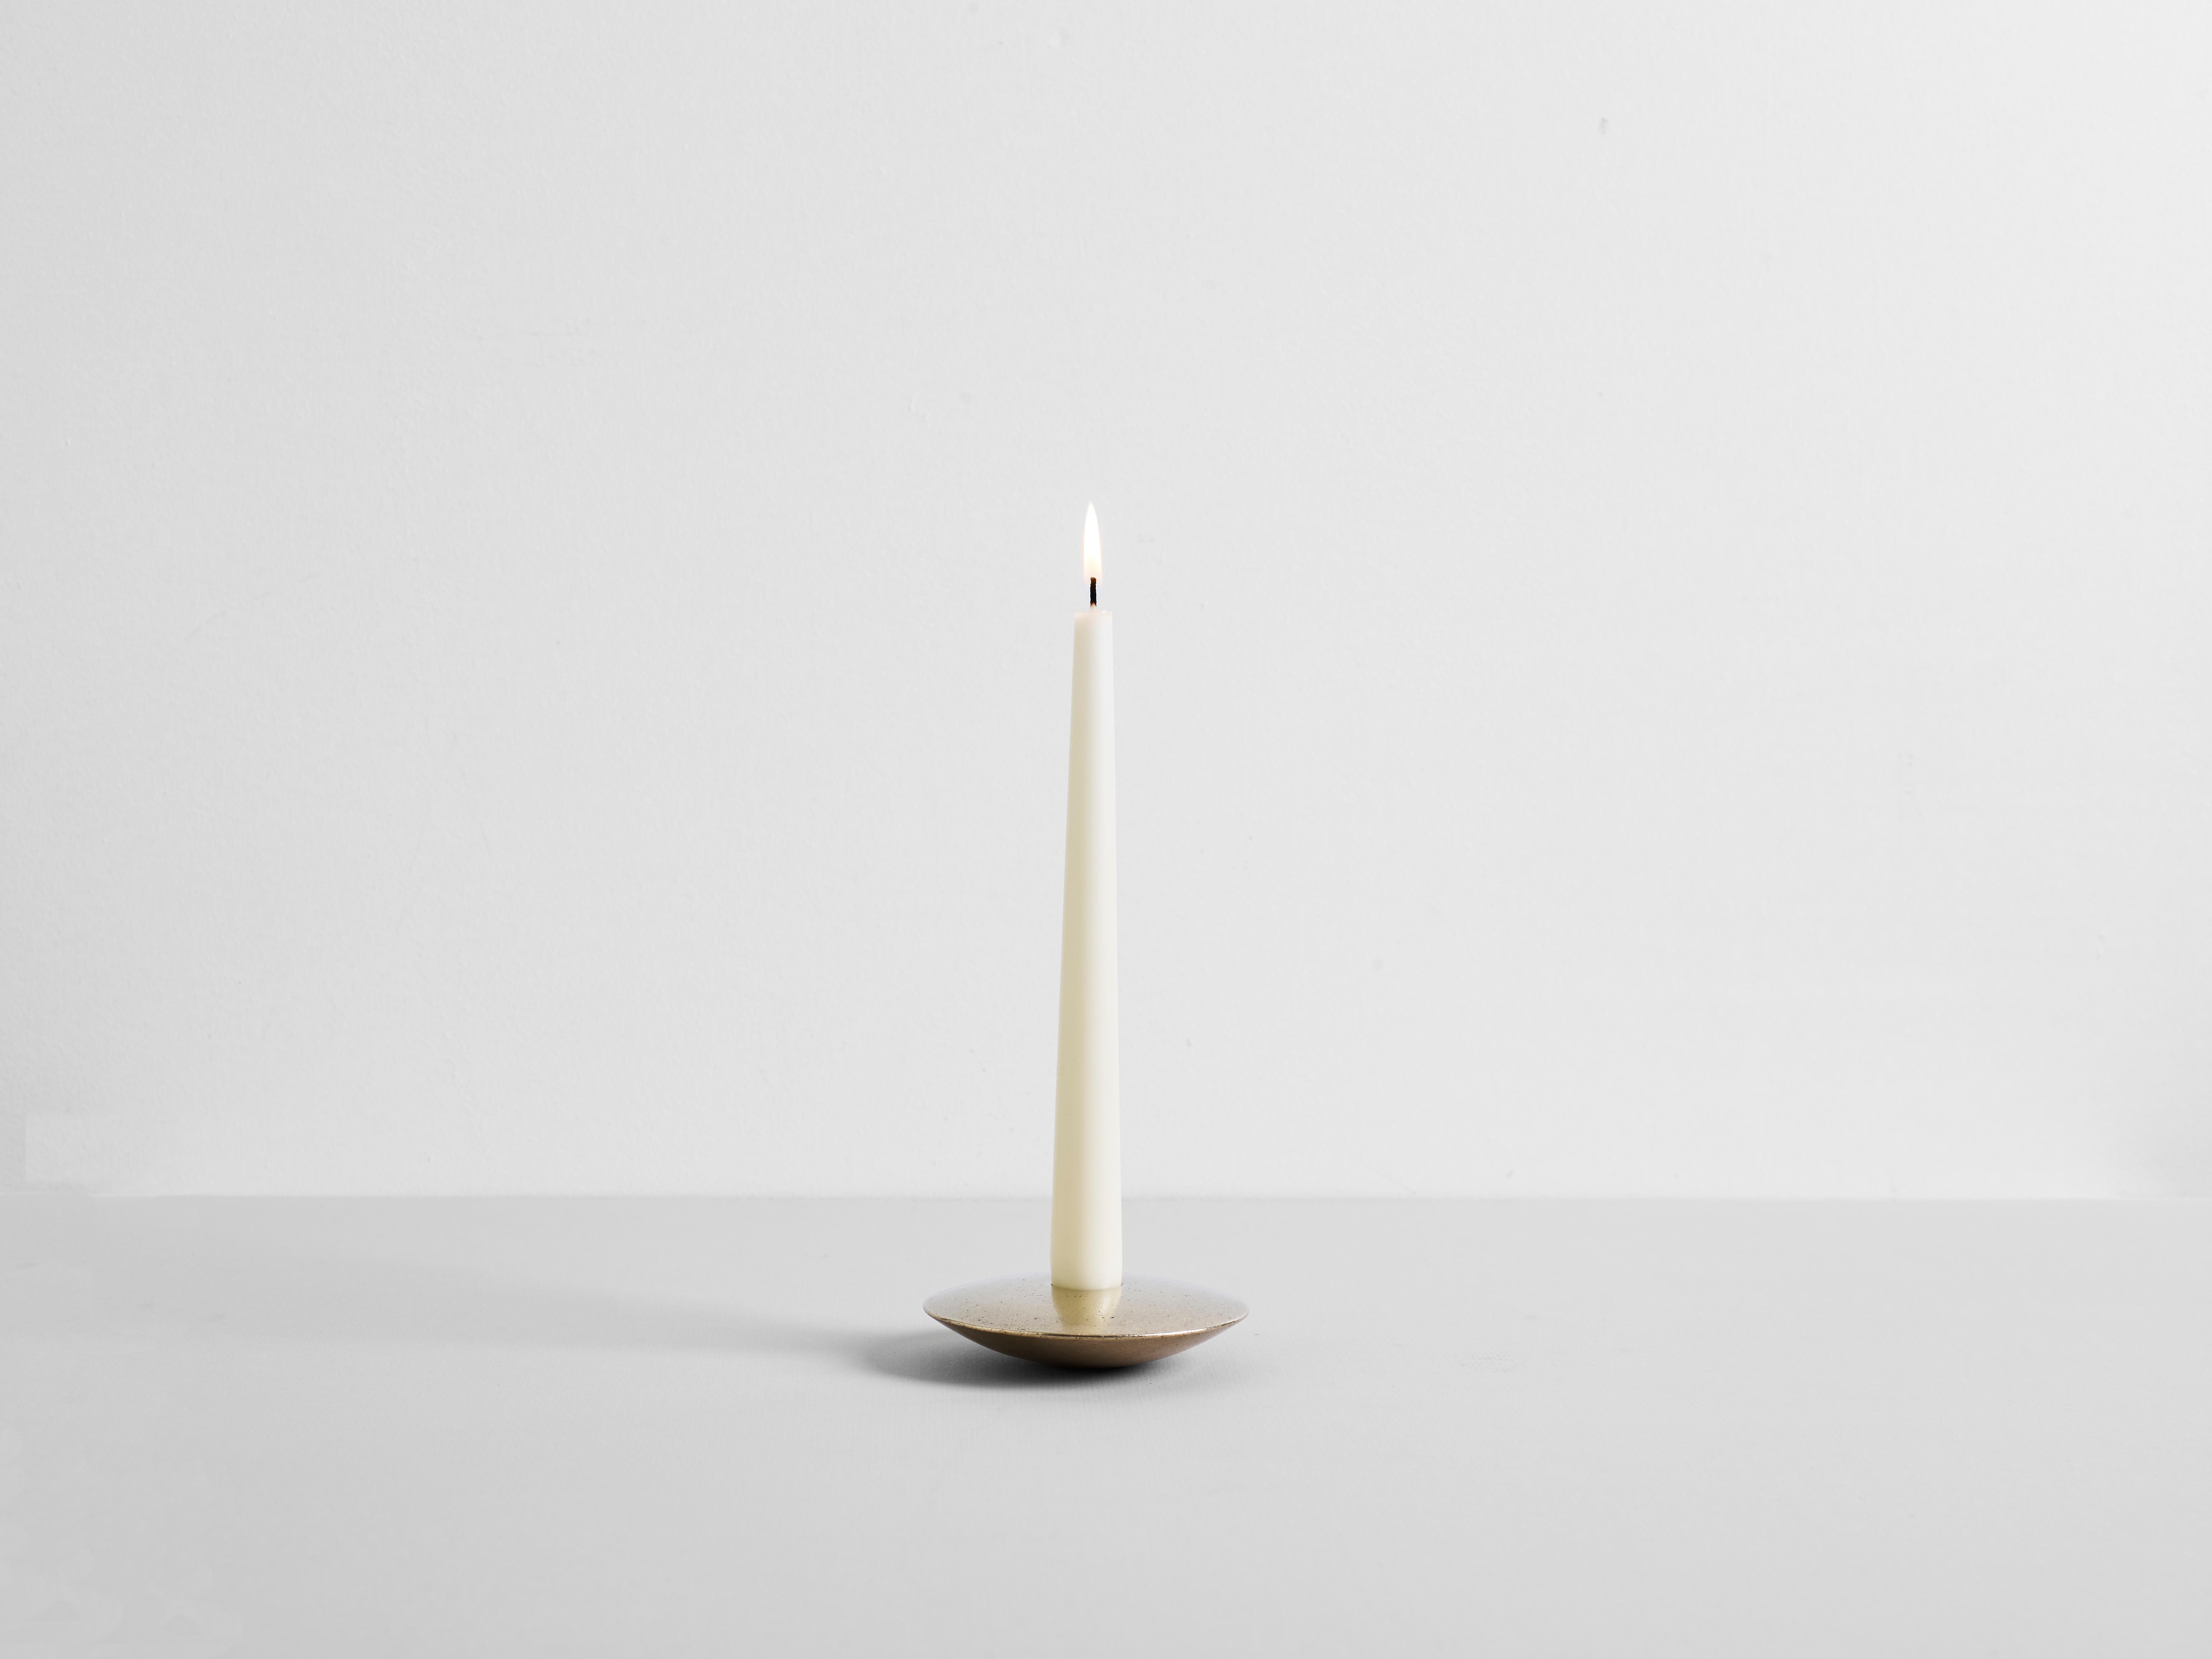 Set of 3 Almendres Candle Holders by Henry Wilson
Dimensions: Ø 11 x H 3 cm
Materials: Brass

The Almendres Candle Holder is a solid, hand-poured brass form with an almond-shaped profile.
It's manufactured in small batches; slight variations will